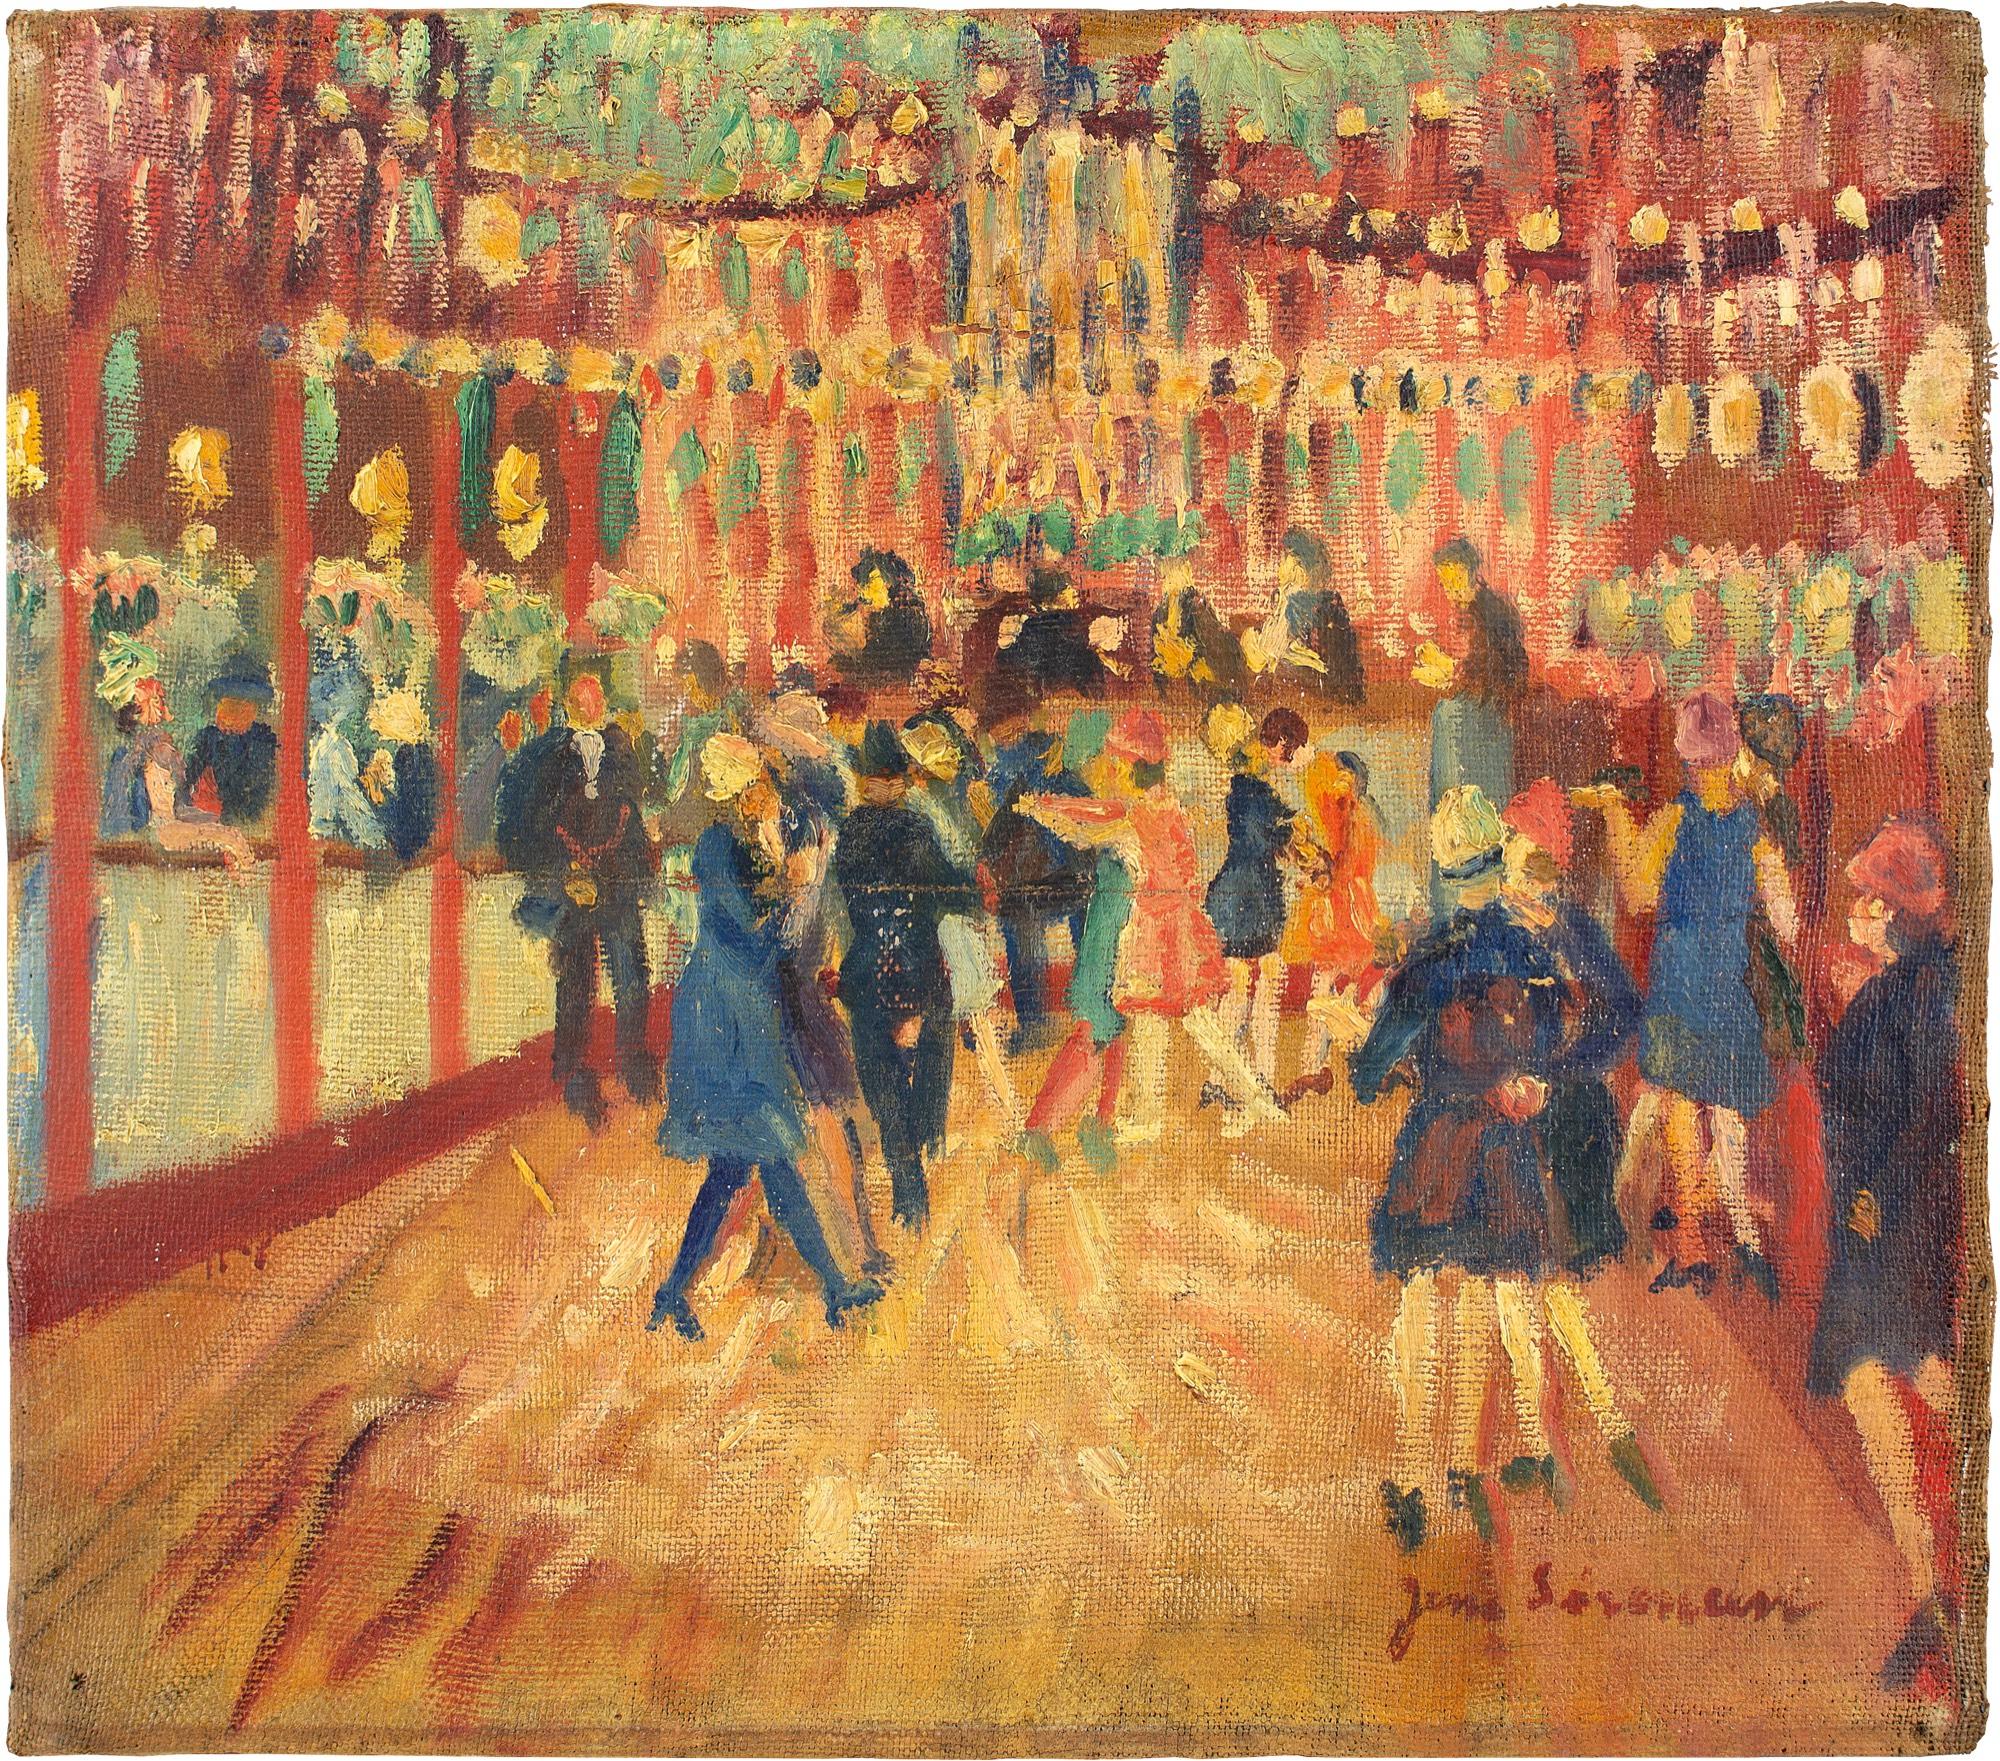 This early 20th-century oil painting by Danish artist Jens Sørensen (1887-1953) depicts a lively scene at Bakken, the world’s oldest amusement park.

Jens Sørensen was predominantly known for his expressive scenes - particularly those depicting